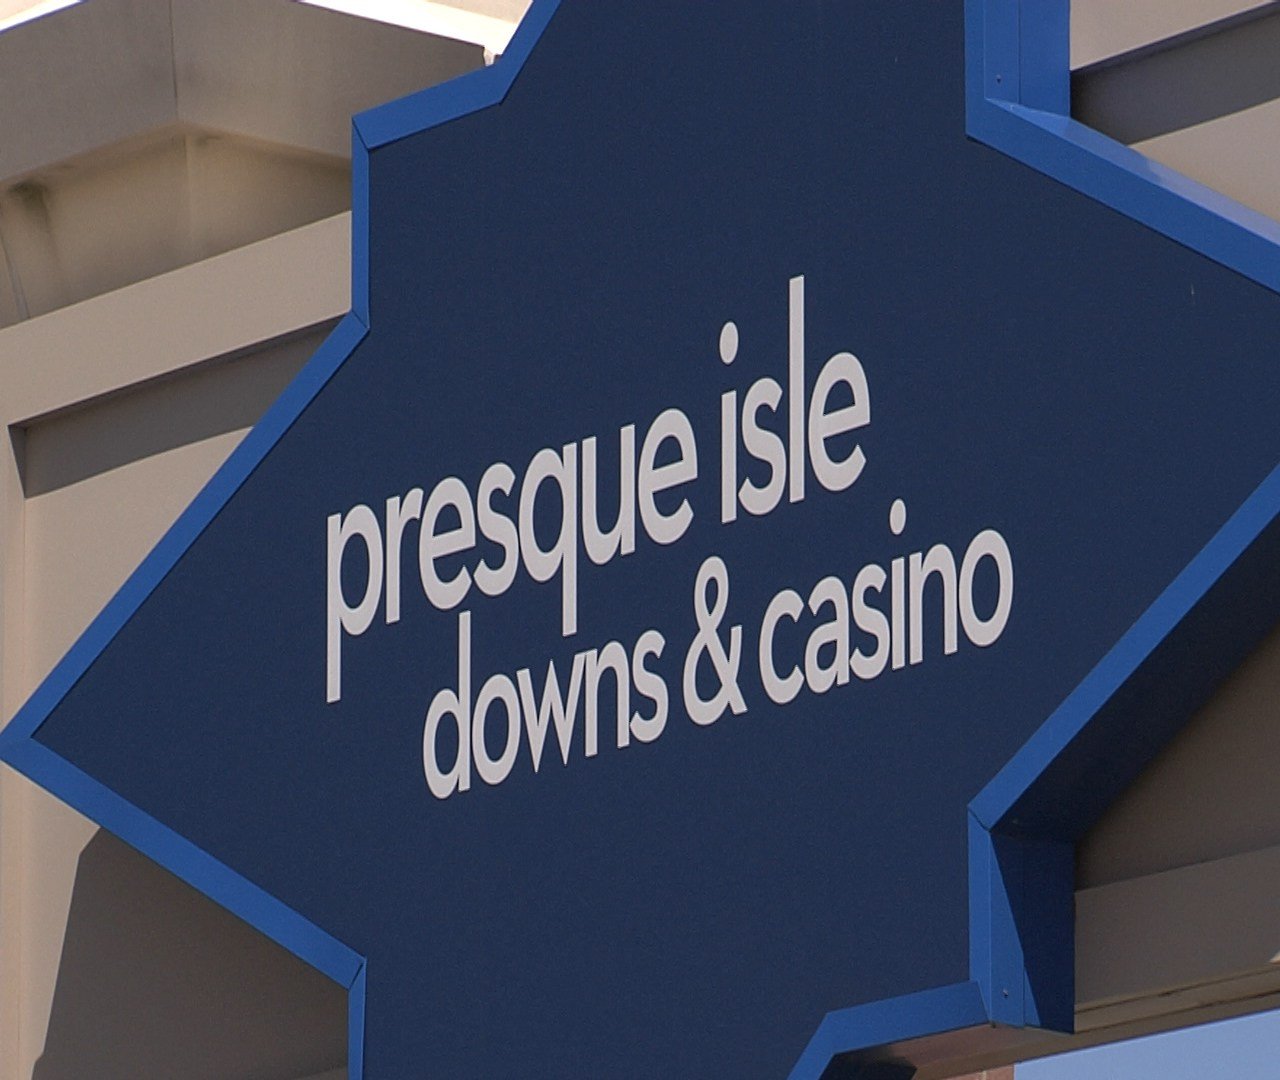 Pa. Gaming Control Board Bans 2 Adults from Commonwealth Casinos after Leaving Children Unattended